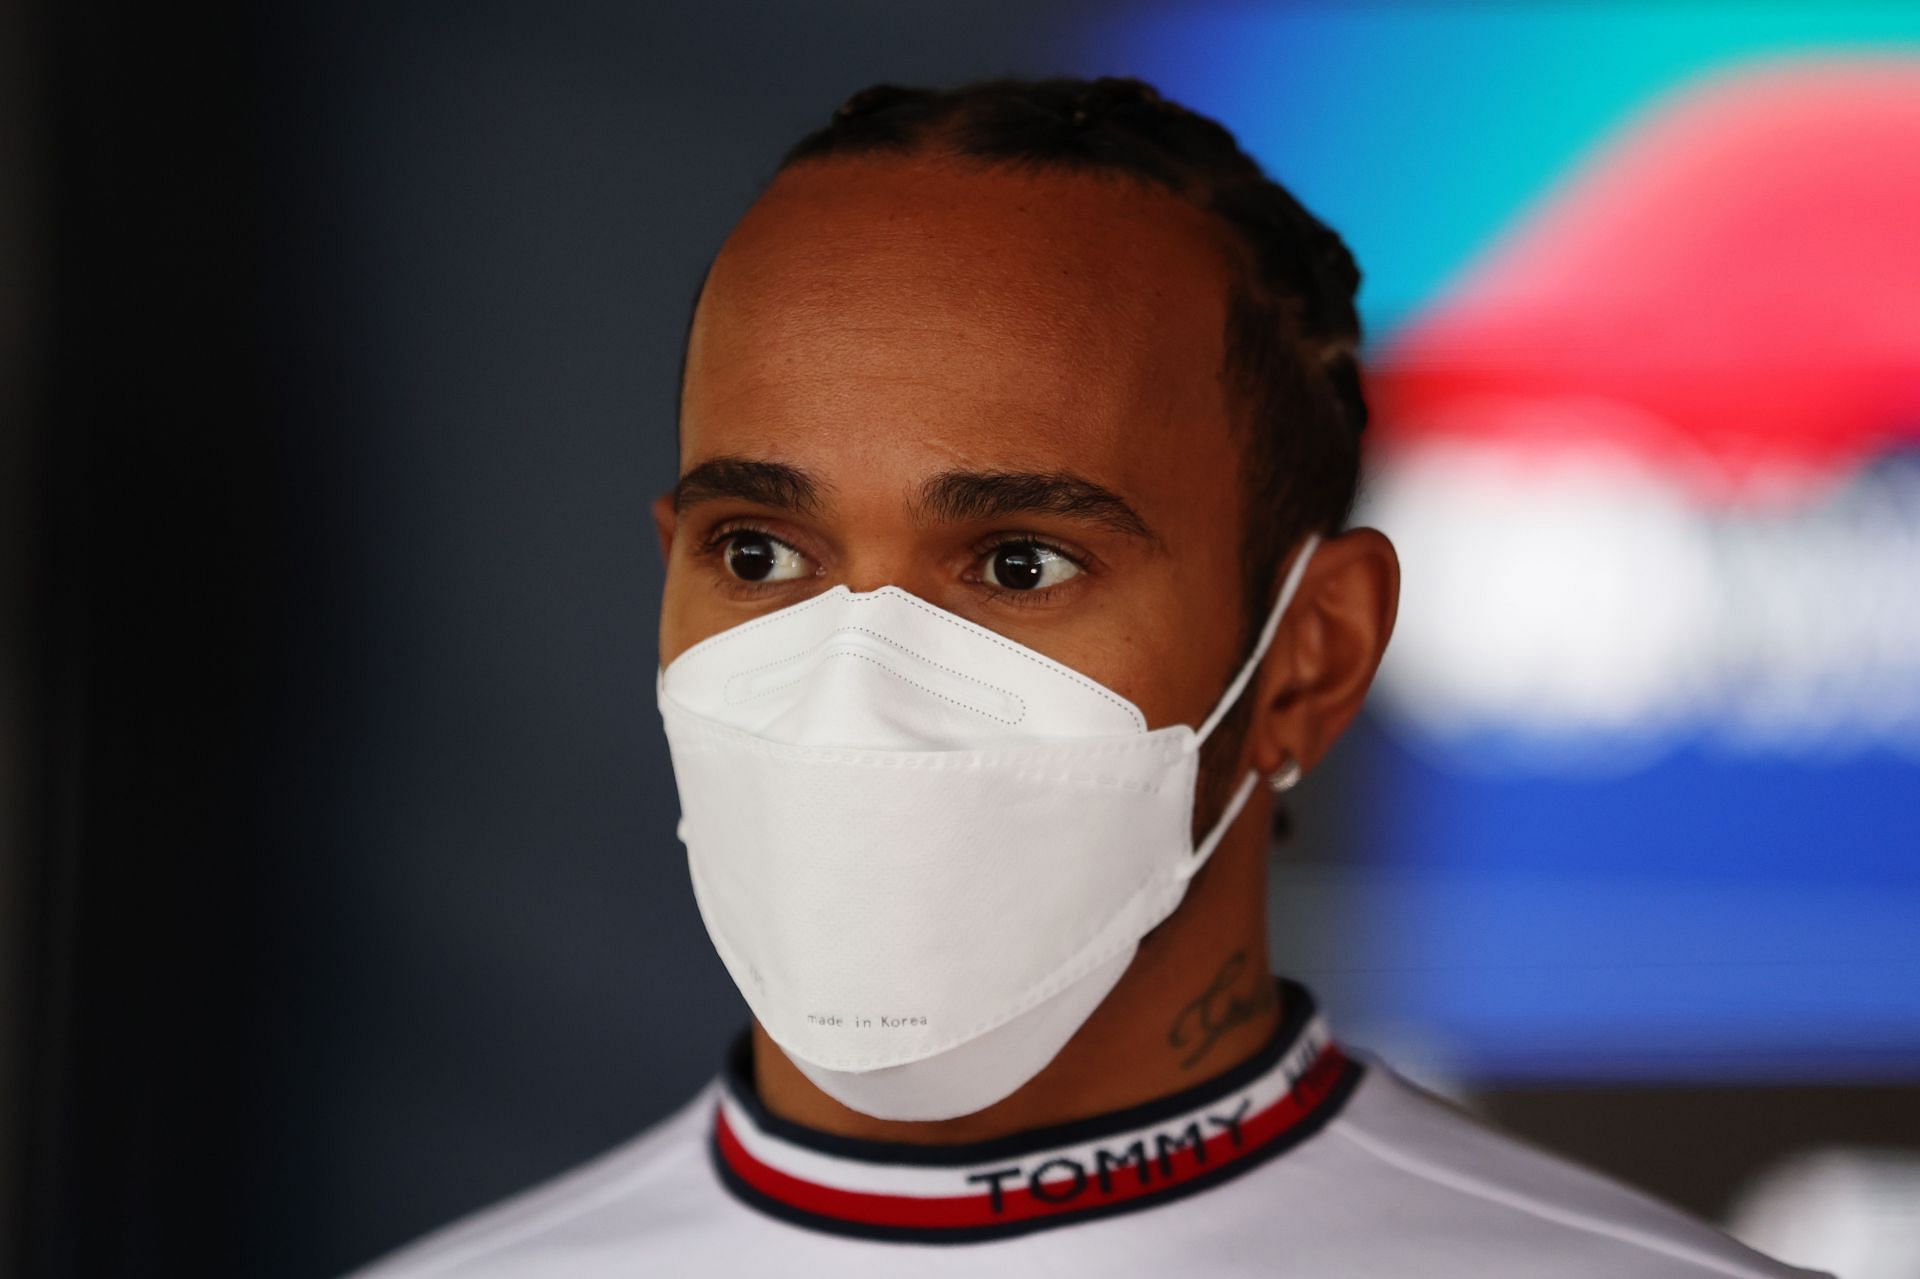 Lewis Hamilton talks to the media in the Paddock during previews ahead of the F1 Grand Prix of Austria at Red Bull Ring on July 07, 2022, in Spielberg, Austria (Photo by Bryn Lennon/Getty Images)